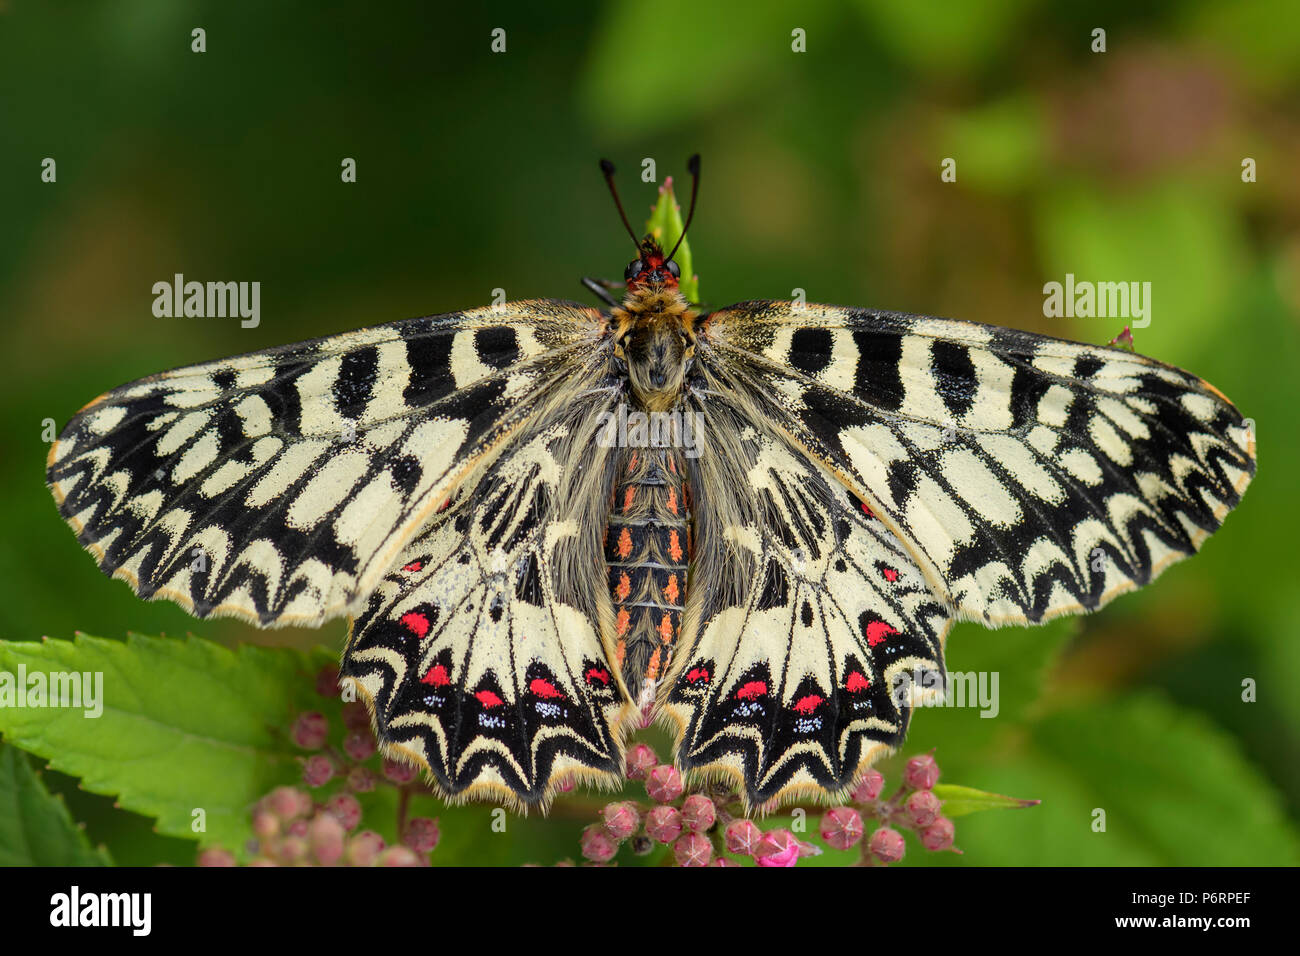 Southern Festoon butterfly - Zerynthia polyxena, beautiful colored rare butterfly from European meadows and grasslands. Stock Photo